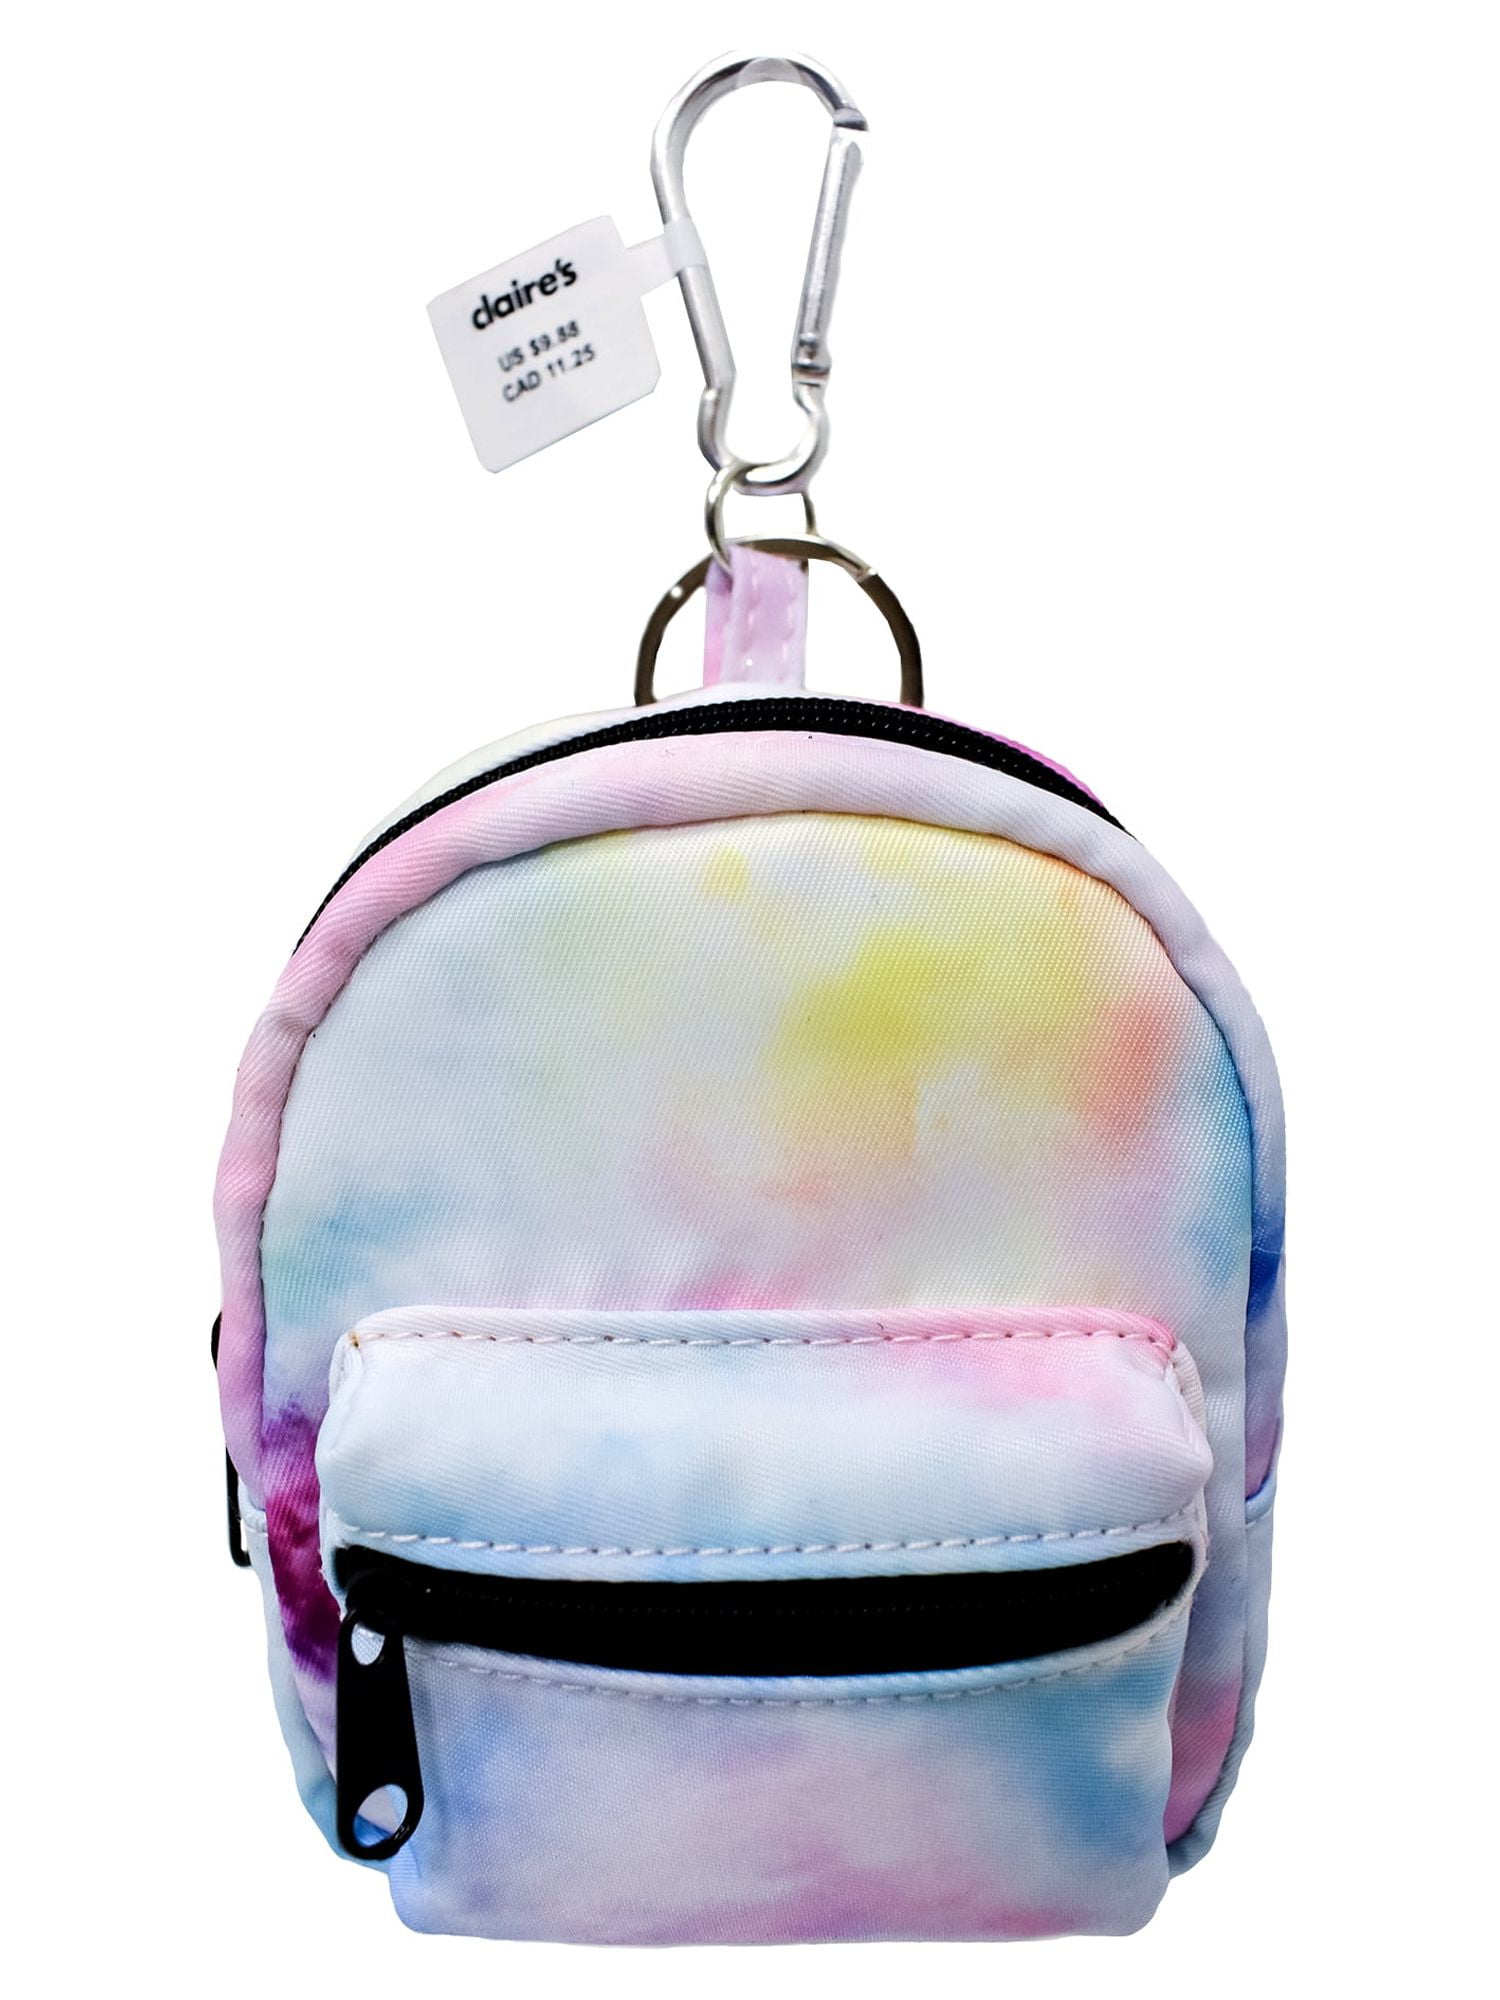 Girls Cute Tie Dye Unicorn Embroidered Messenger Bag, Colorful